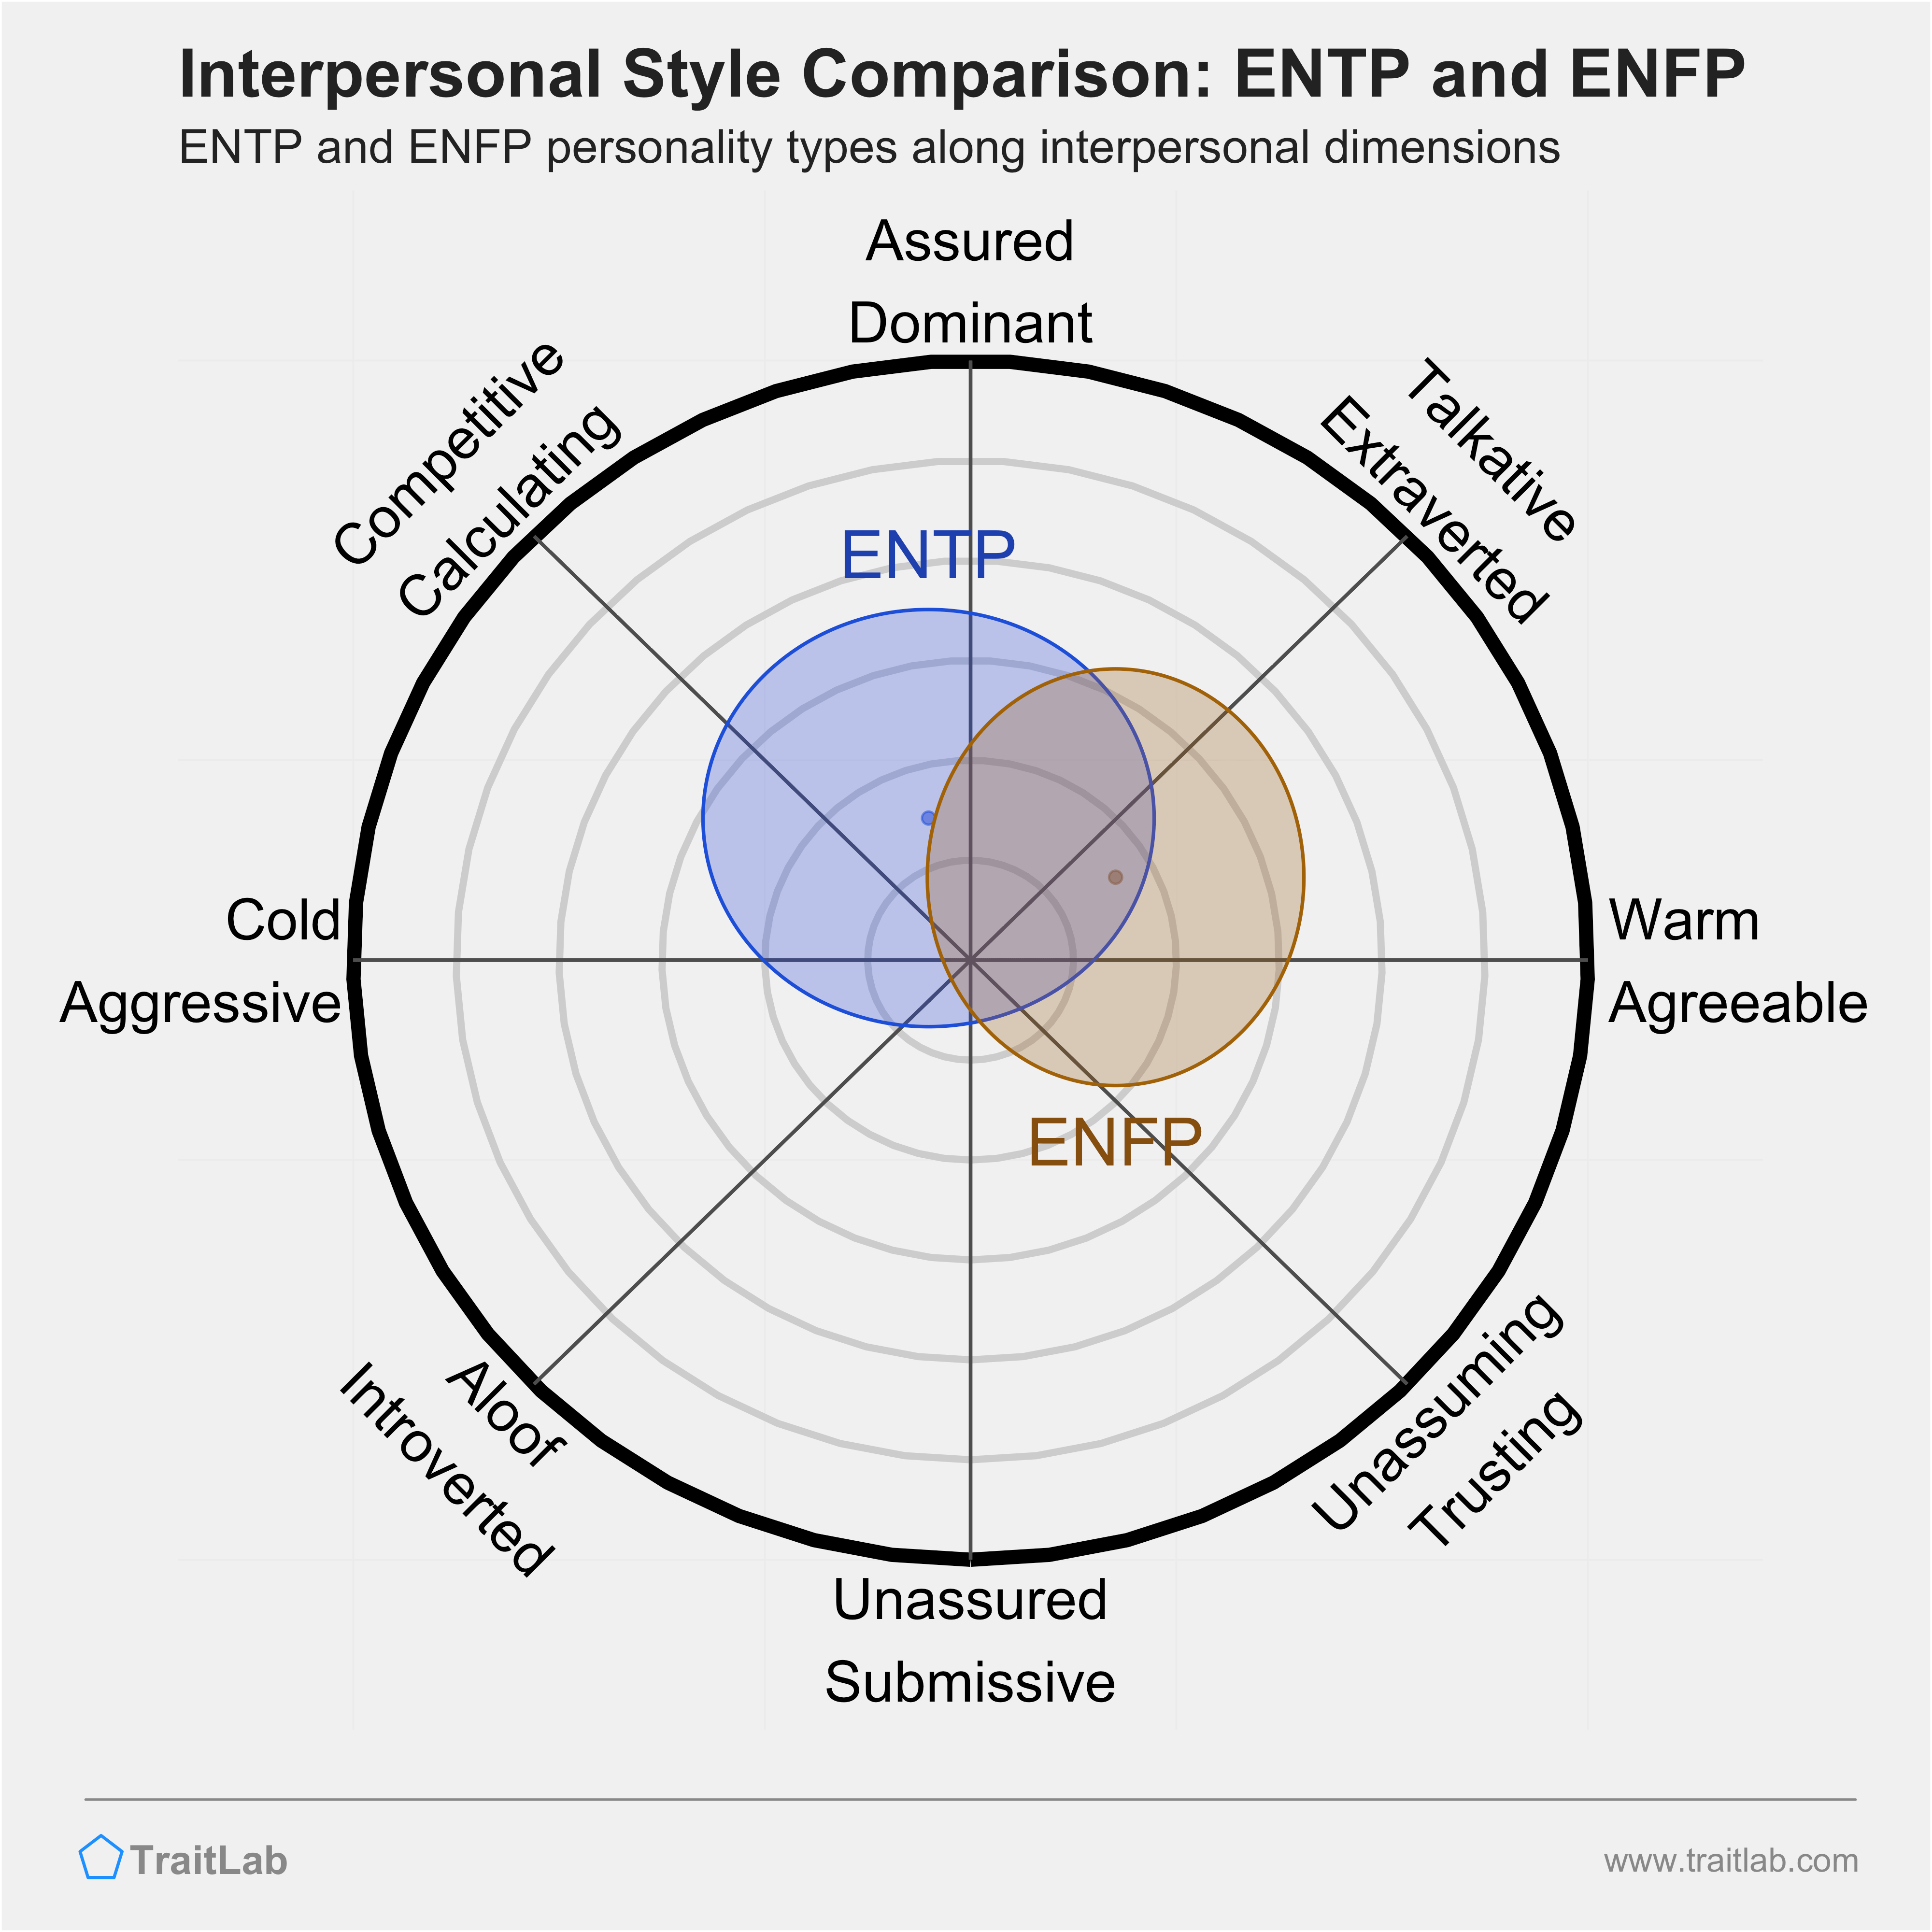 ENTP and ENFP comparison across interpersonal dimensions